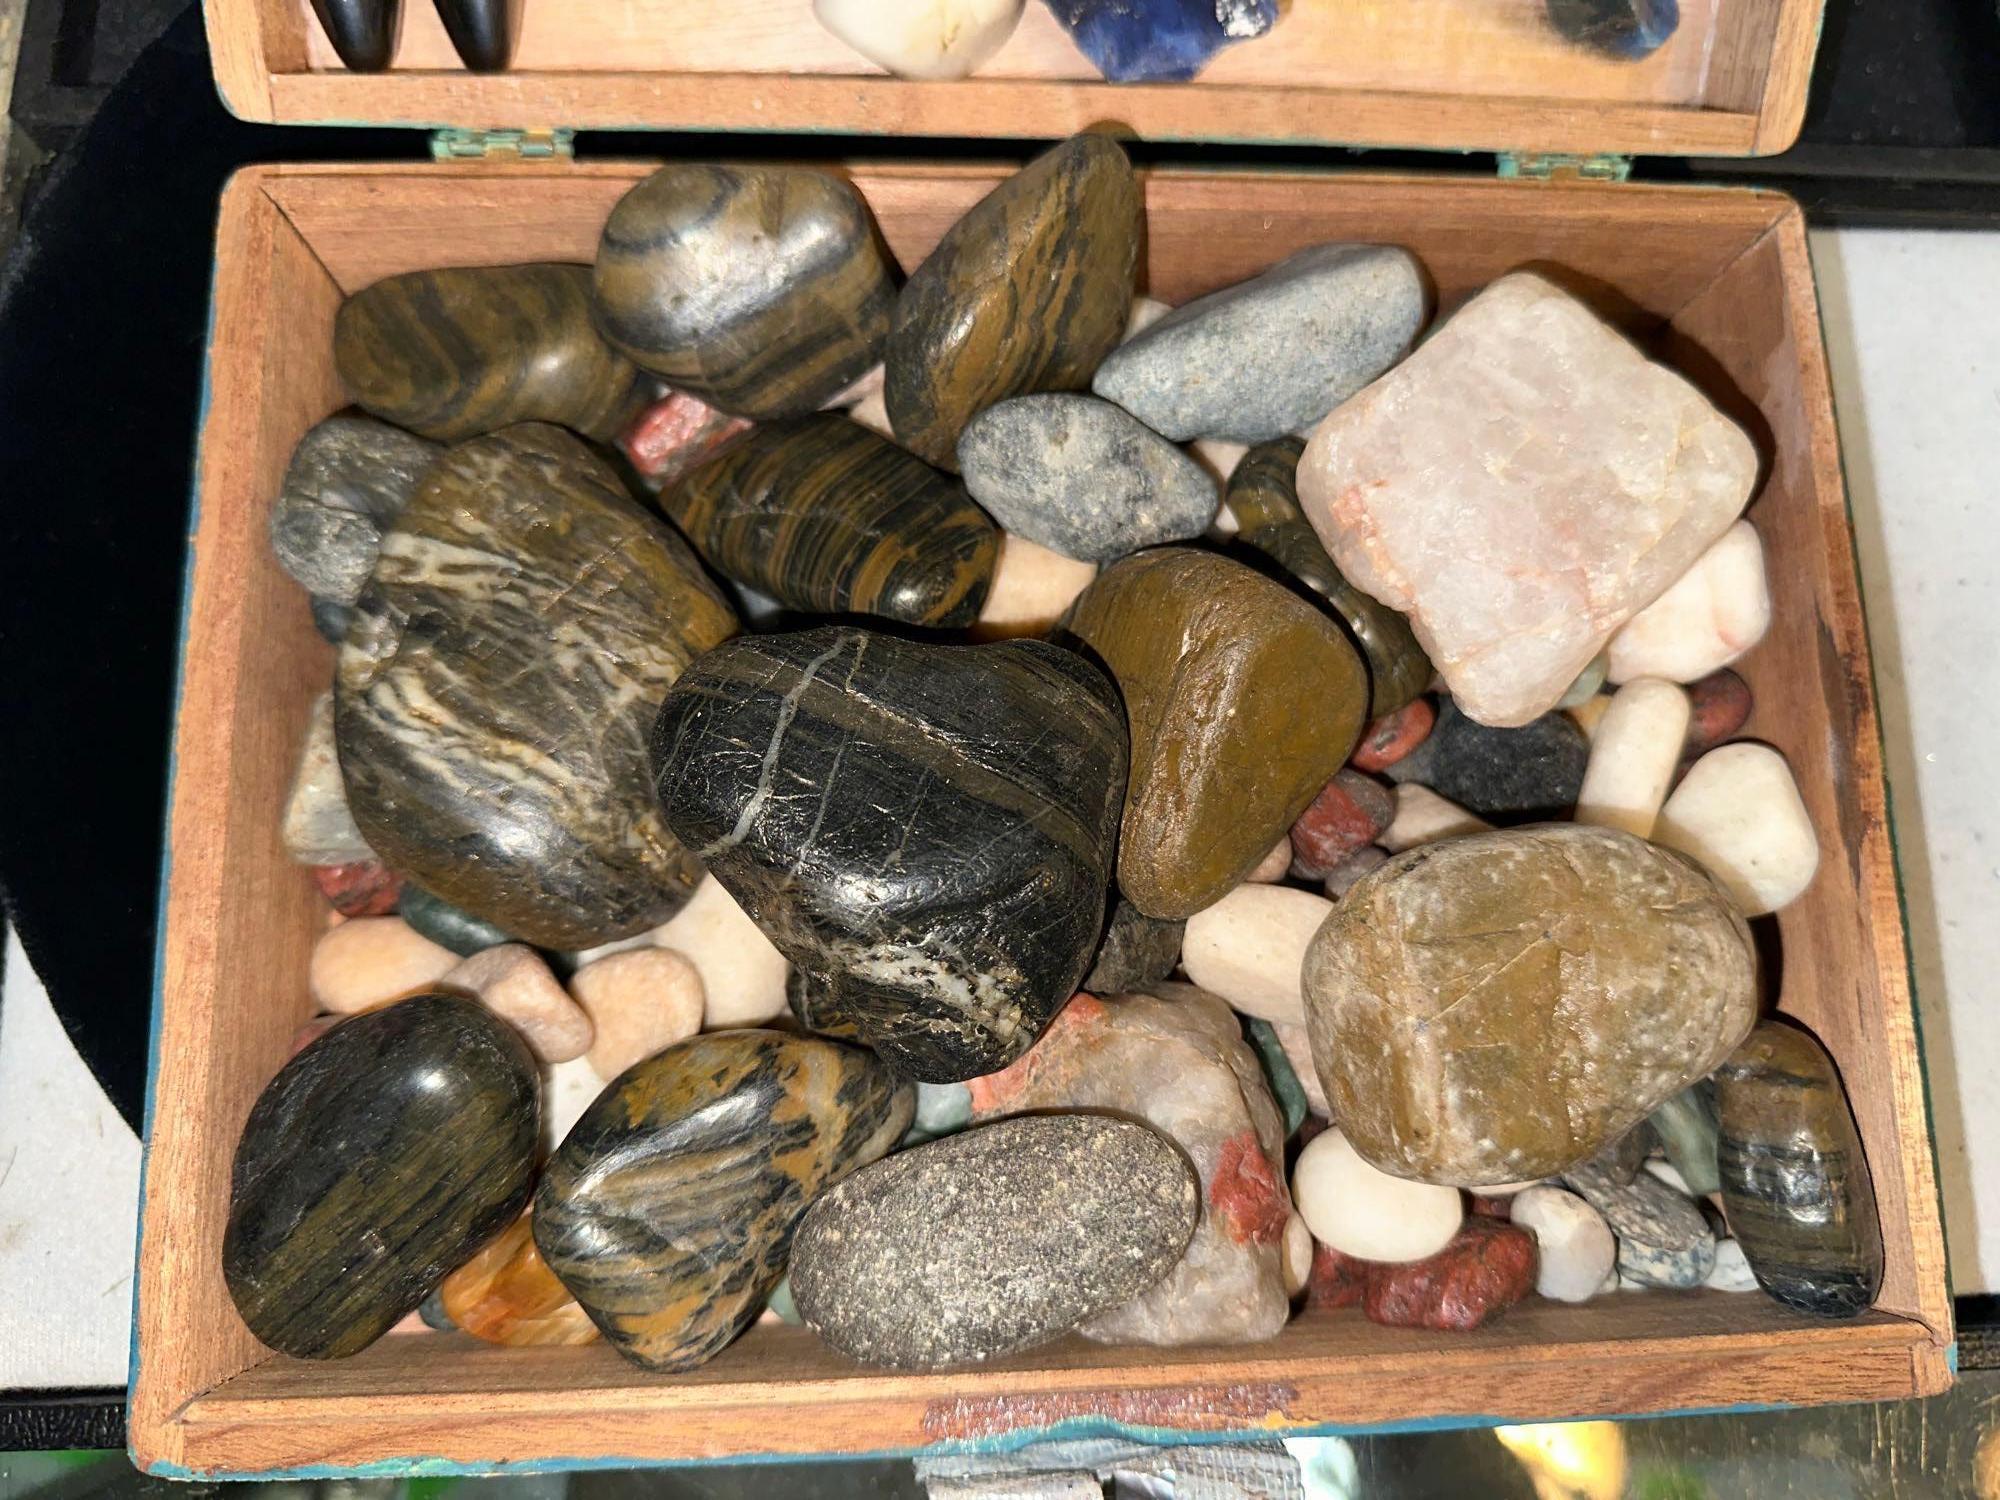 Box full of Cool Rocks and Semi precious stones- From Storage- Unsearched